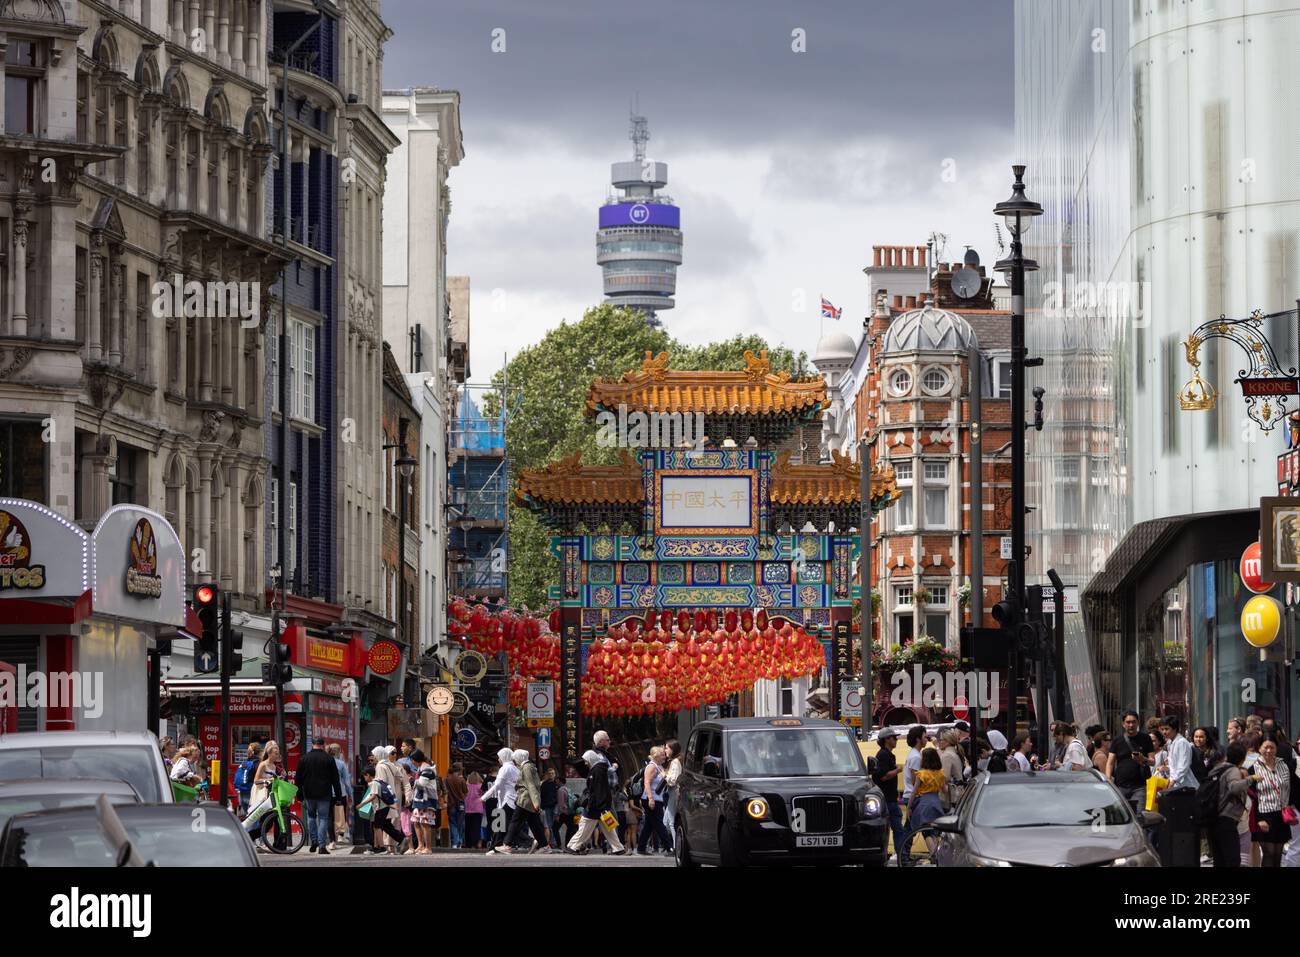 BT Tower seen in the distance behind China Town, central London, England, United Kingdom Stock Photo